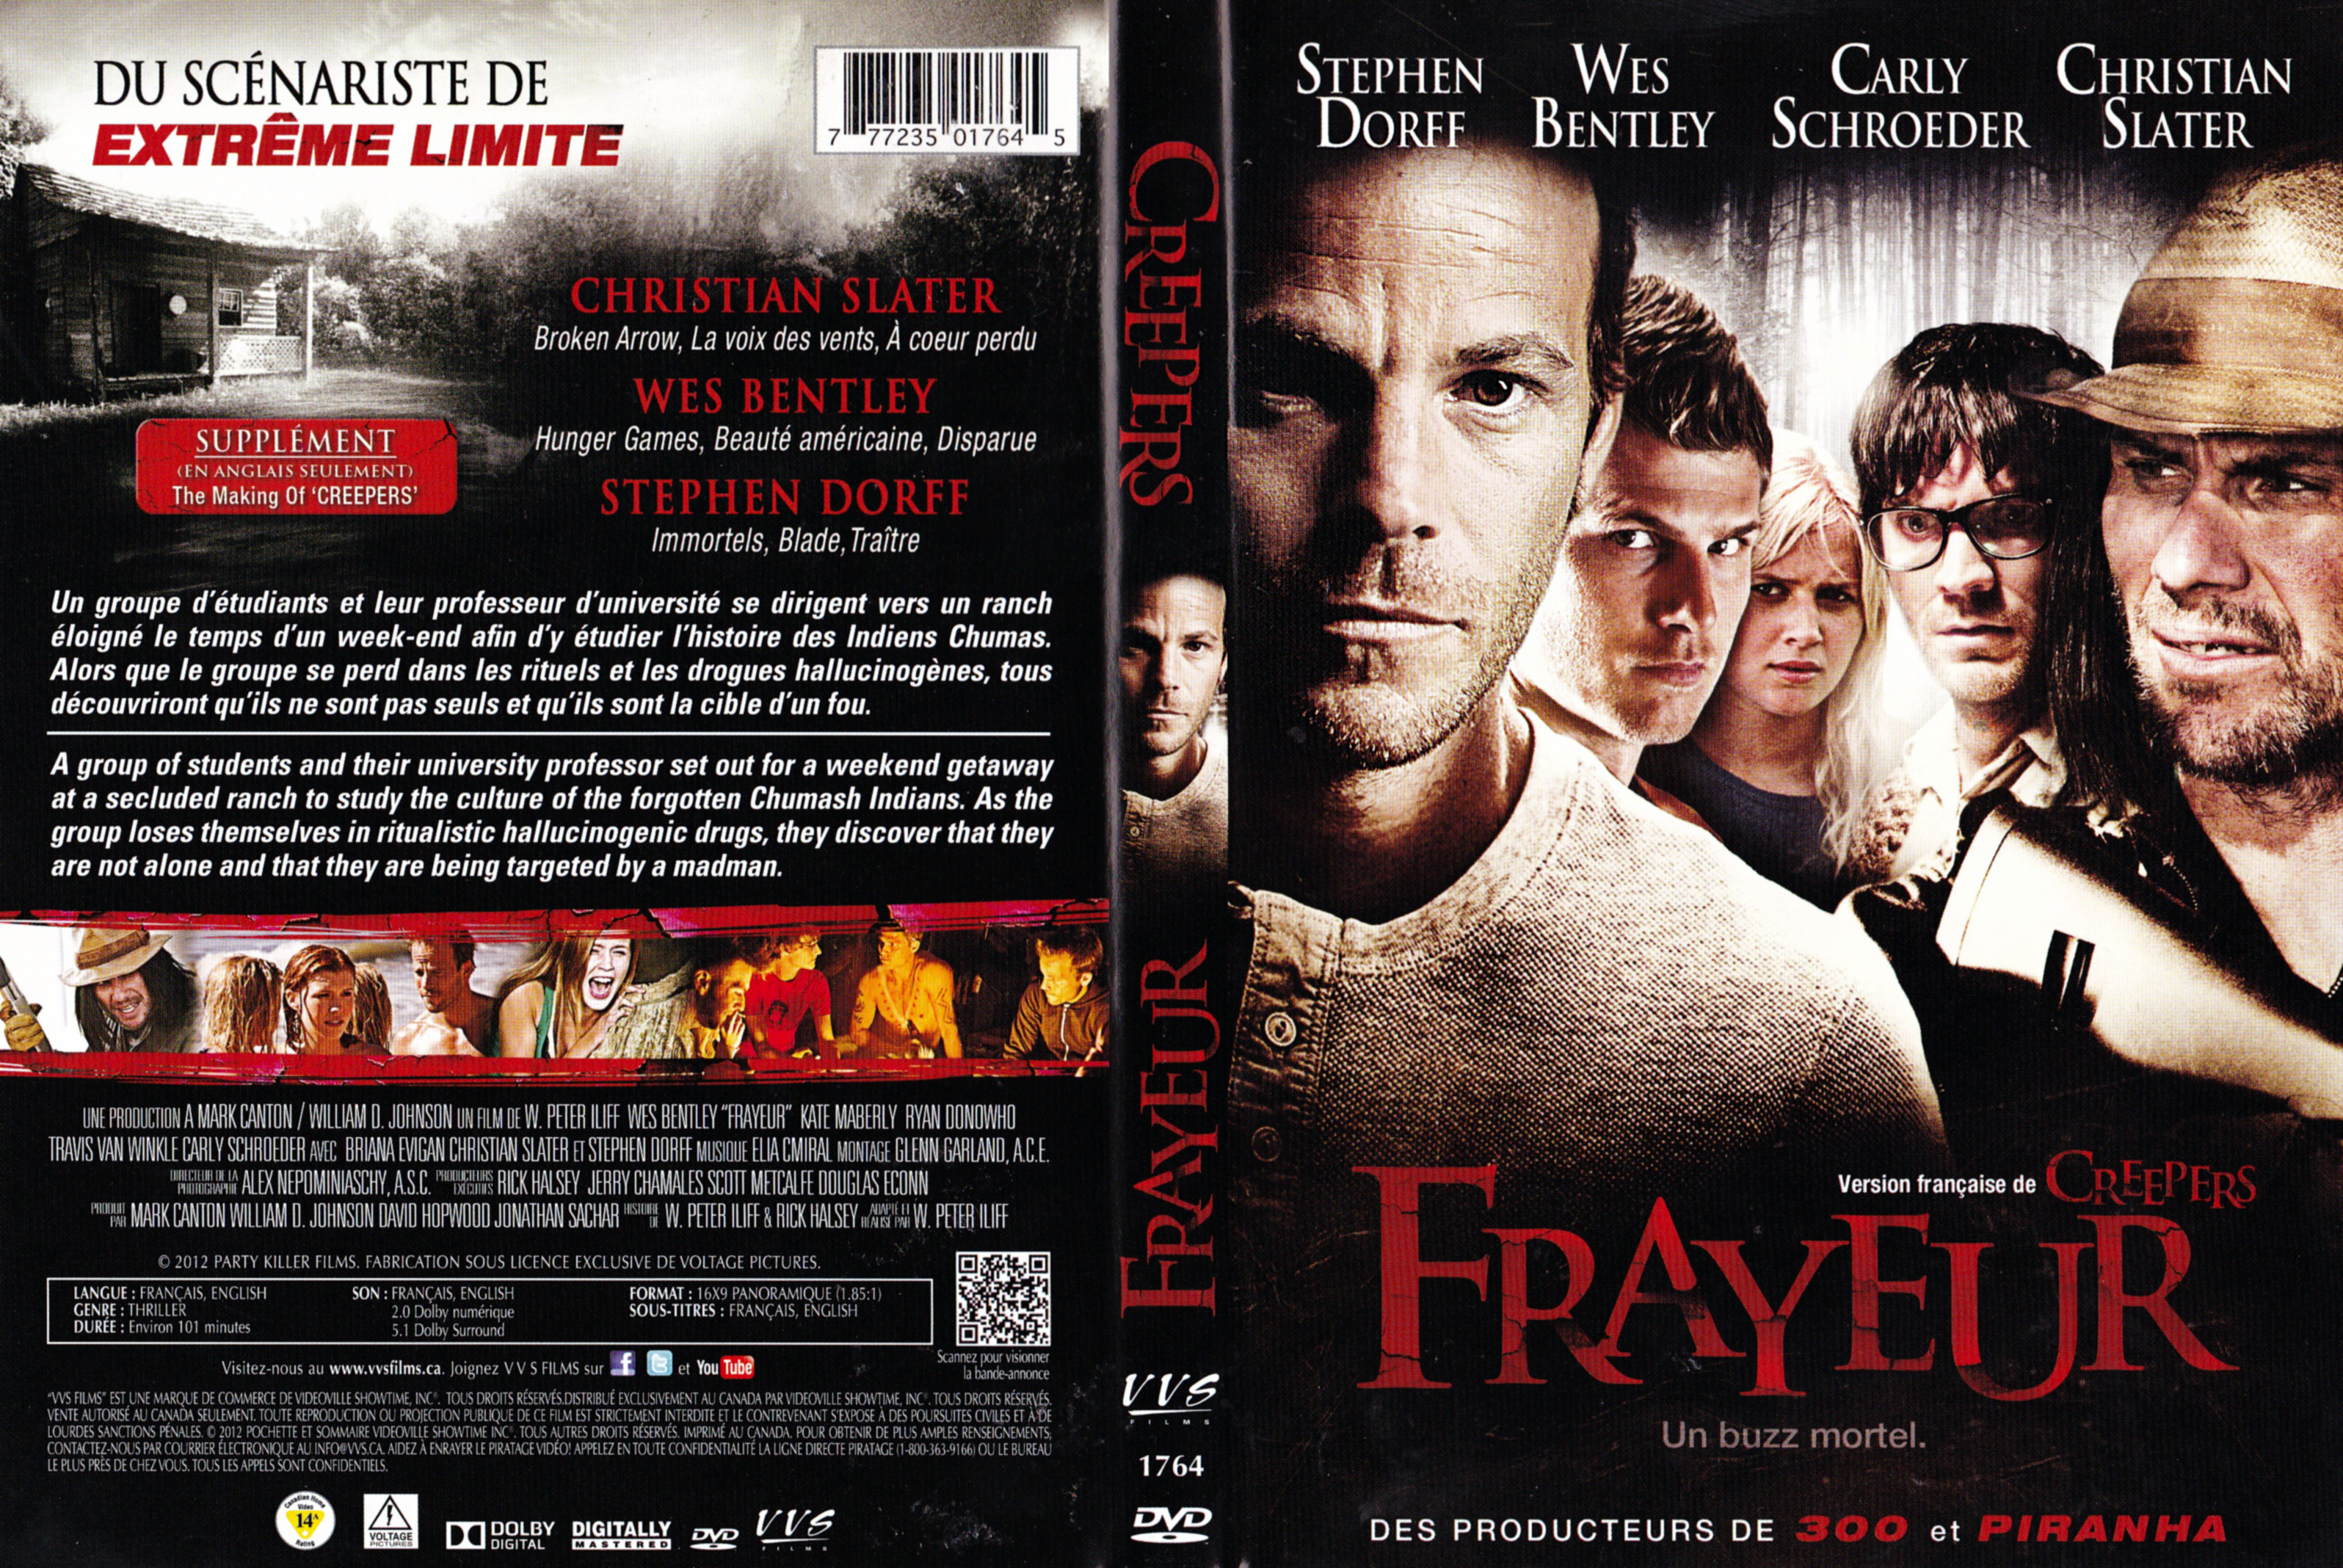 Jaquette DVD Frayeur - Creepers (Canadienne)